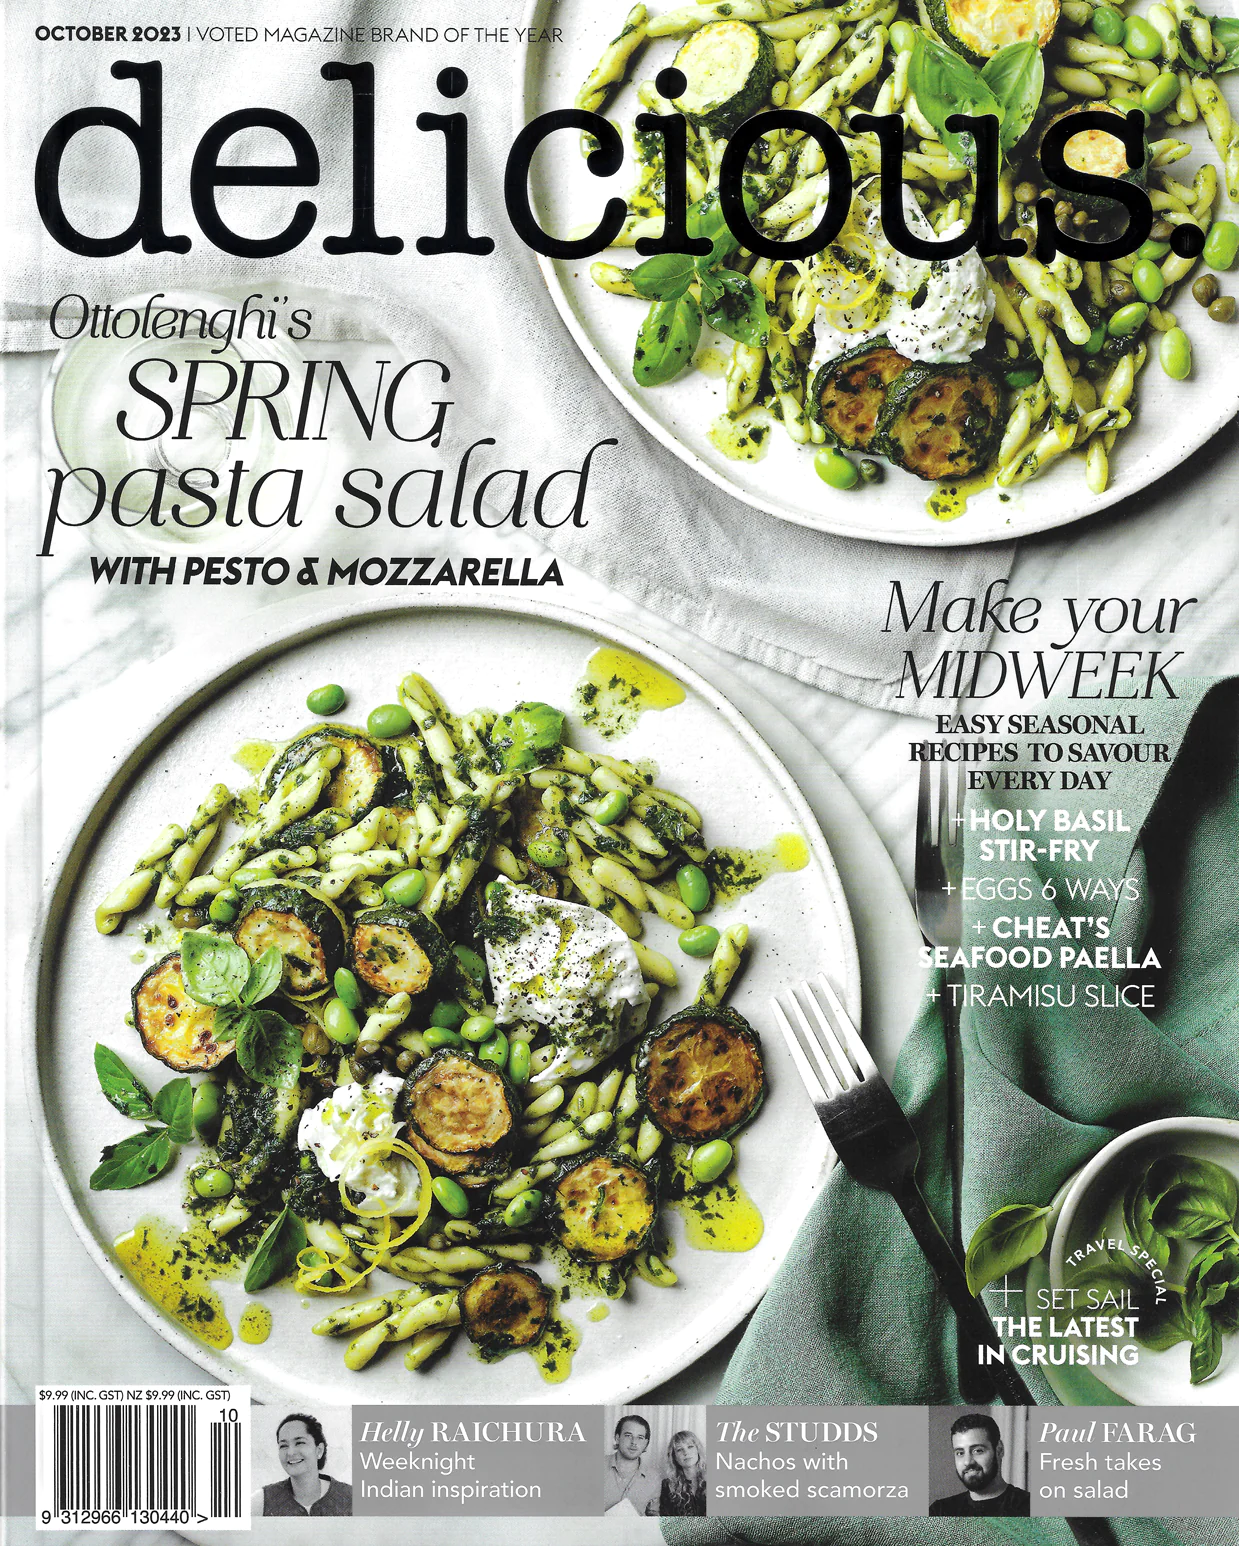 Malfroy's Gold delicious Magazine October 23